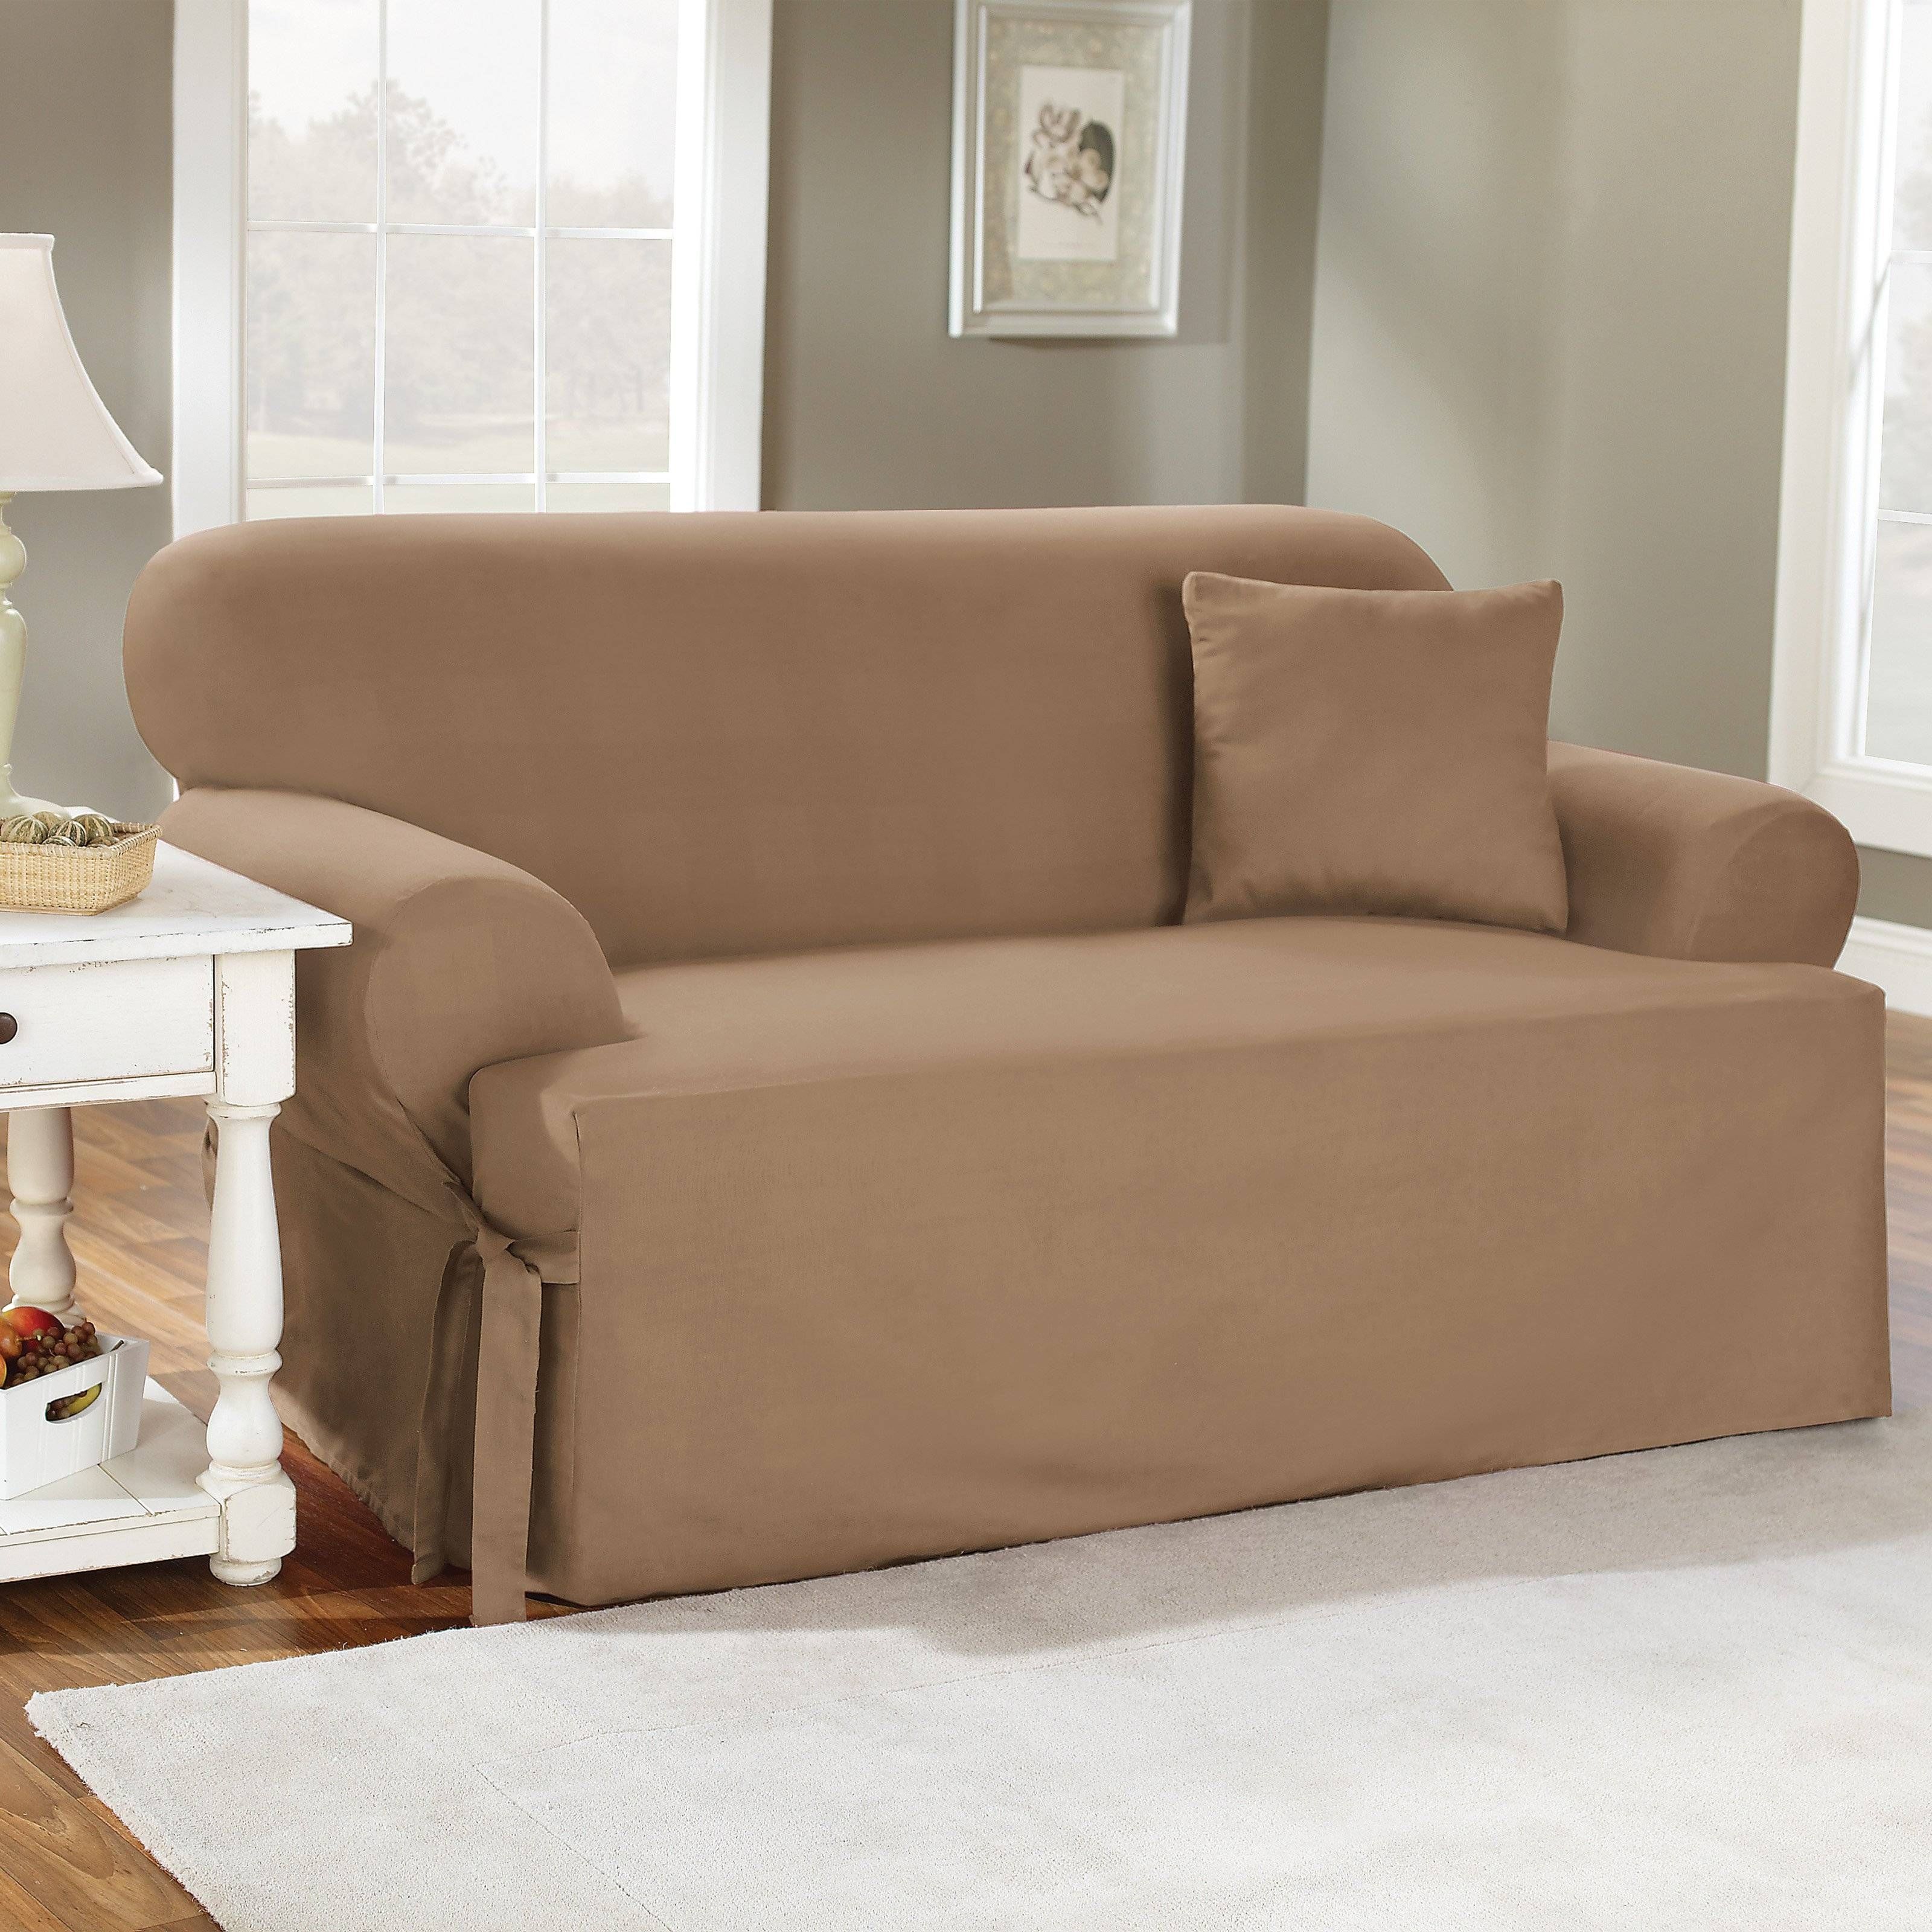 Furniture & Sofa: Stunning Sure Fit Sofa Covers Design For Inside Armless Couch Slipcovers (View 11 of 15)